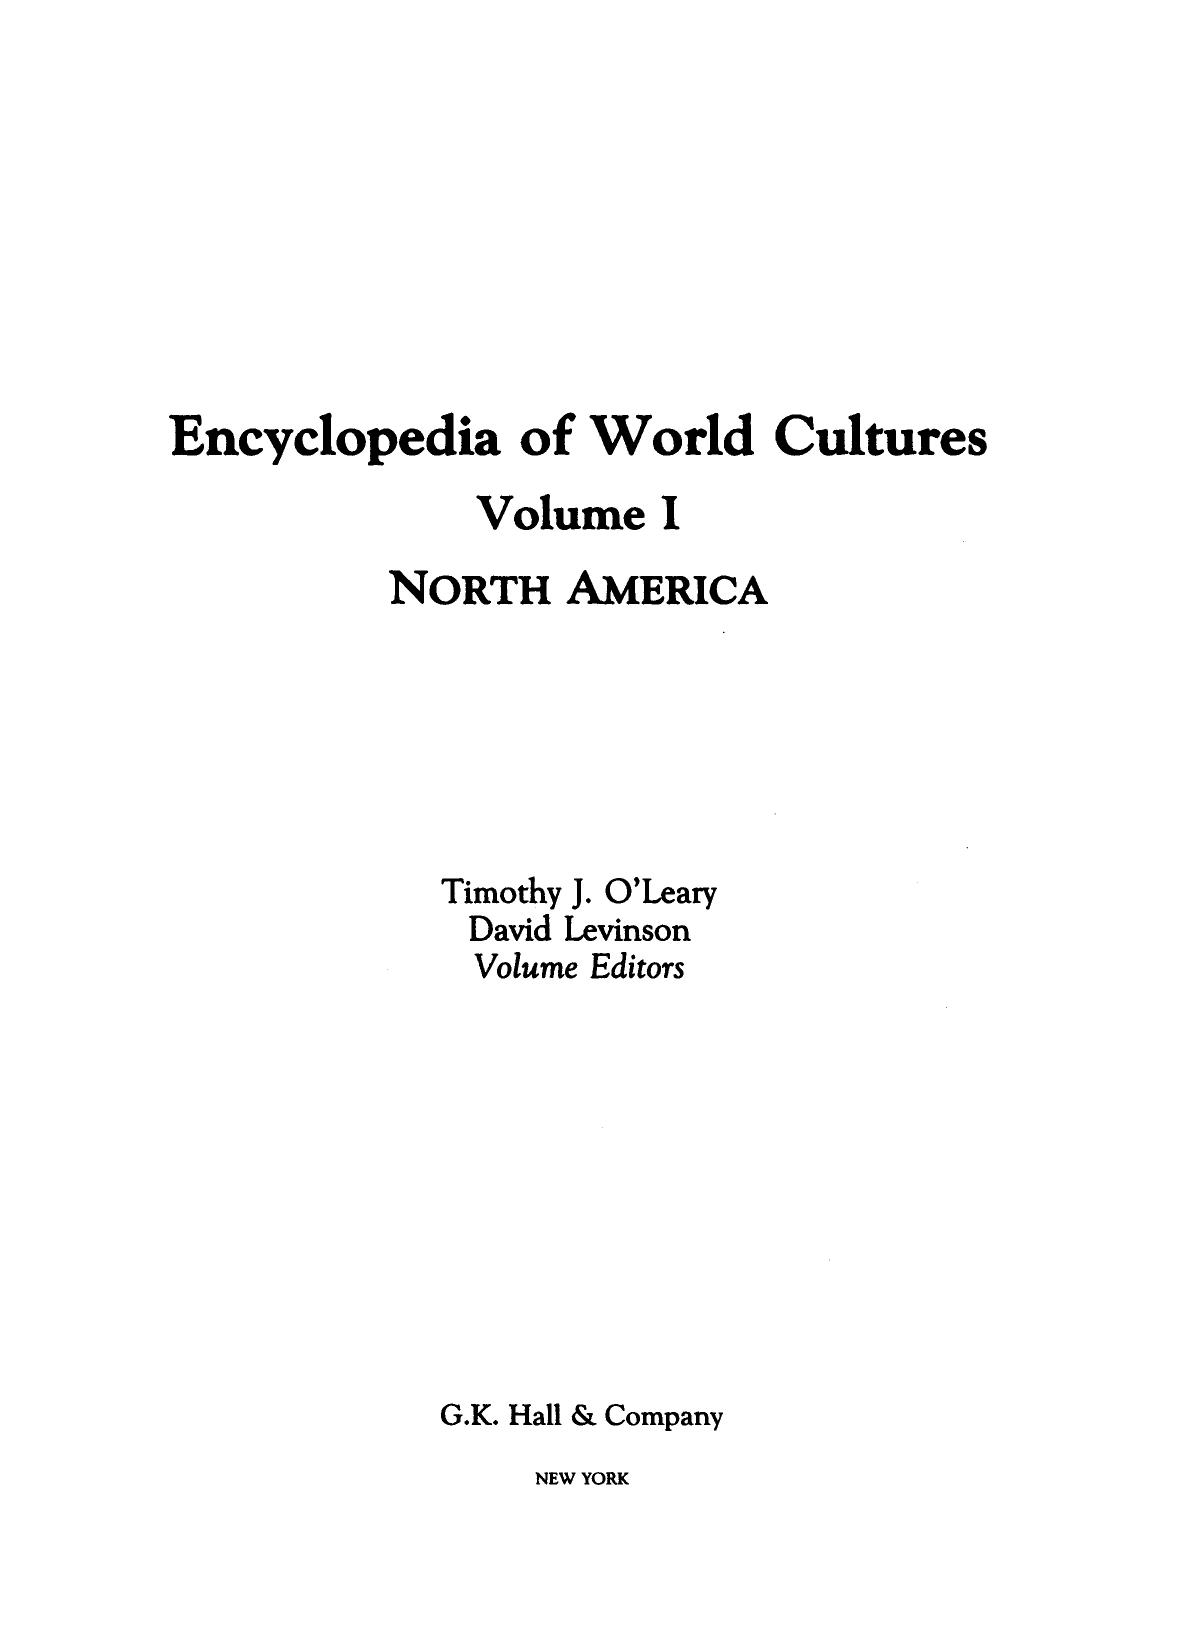 Encyclopedia of World Cultures North America